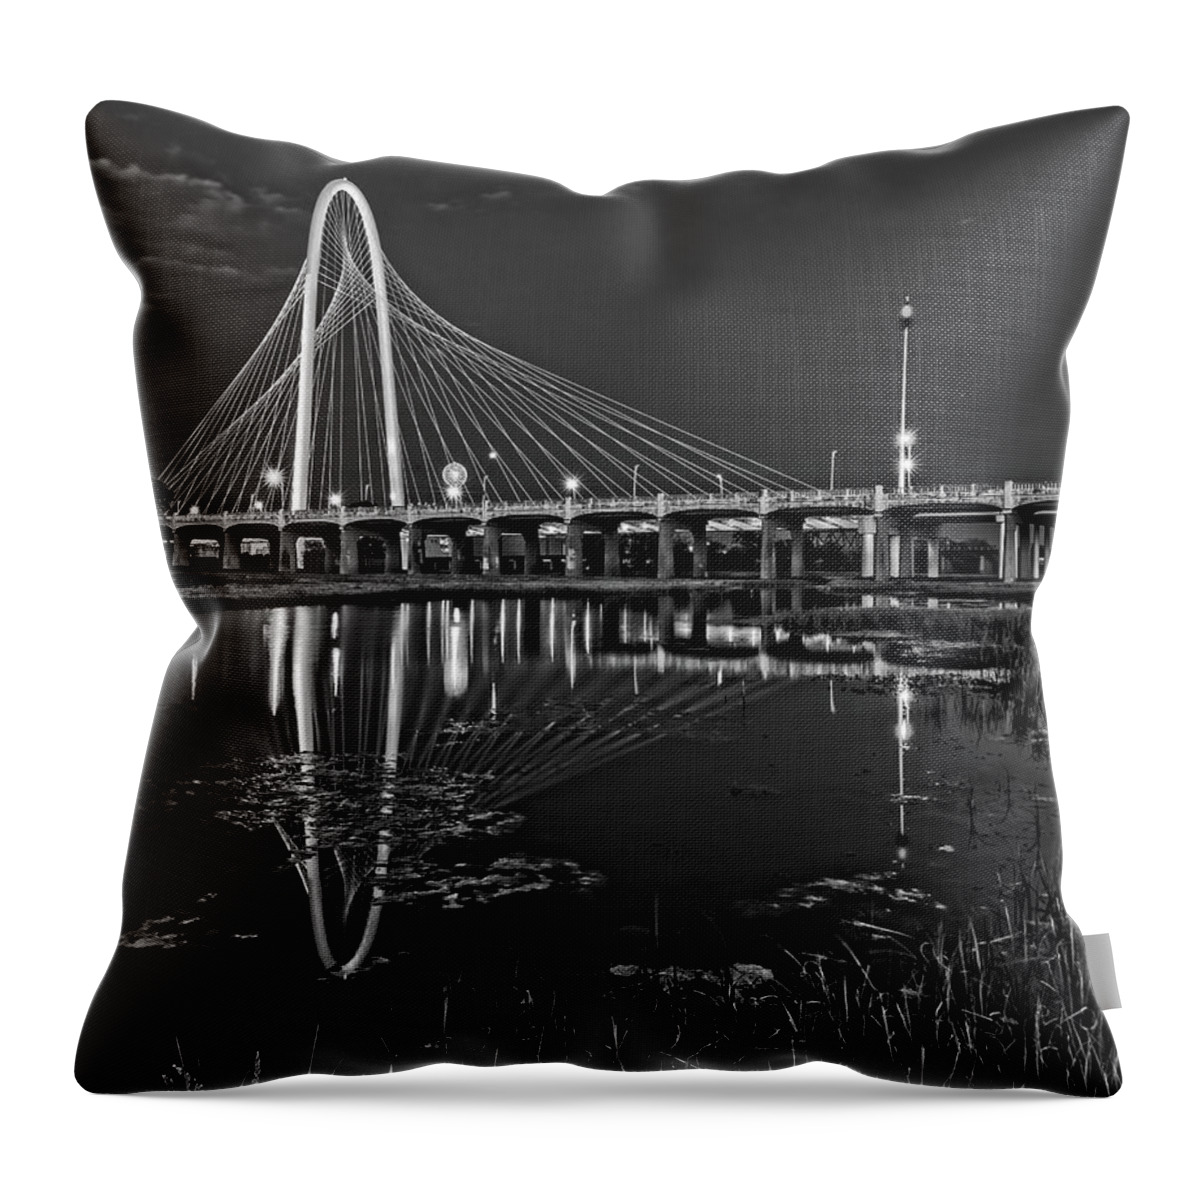 The Bridge Throw Pillow featuring the photograph The Bridge by George Buxbaum